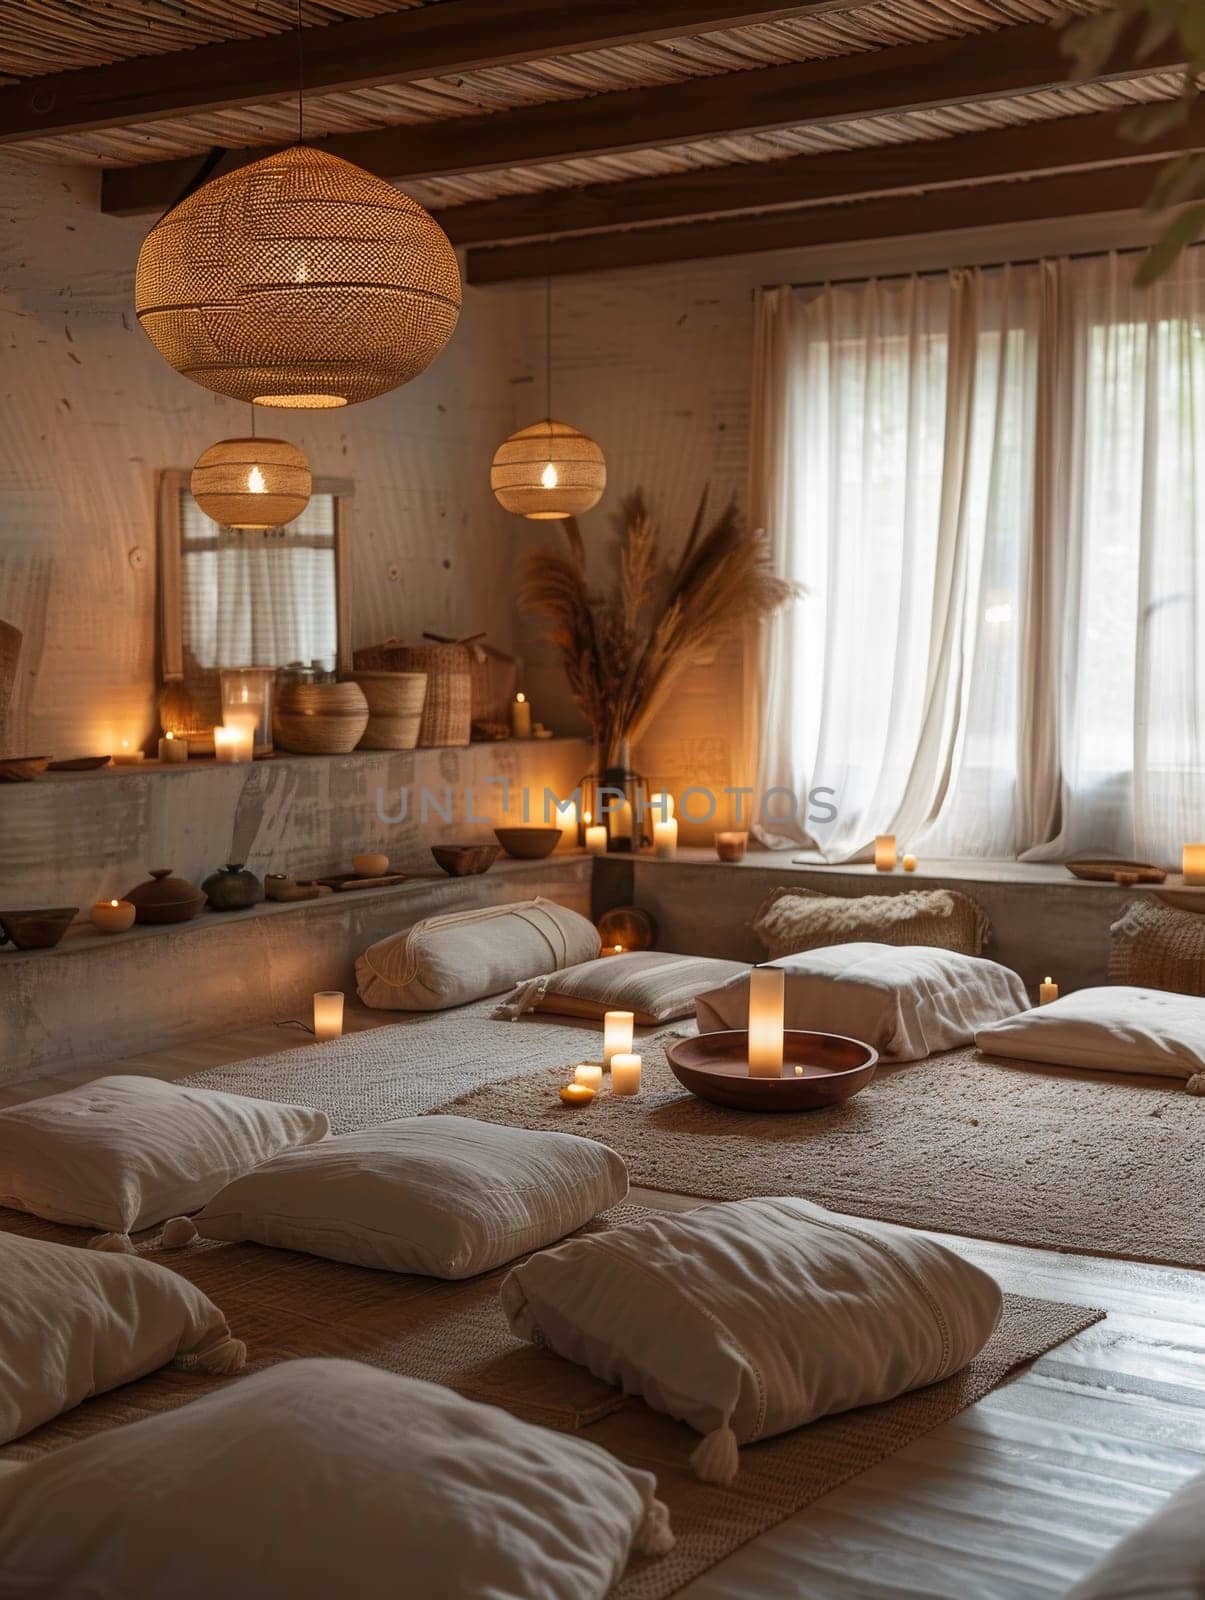 A room with a rug and pillows, lit with candles and lamps. The room has a warm and cozy atmosphere